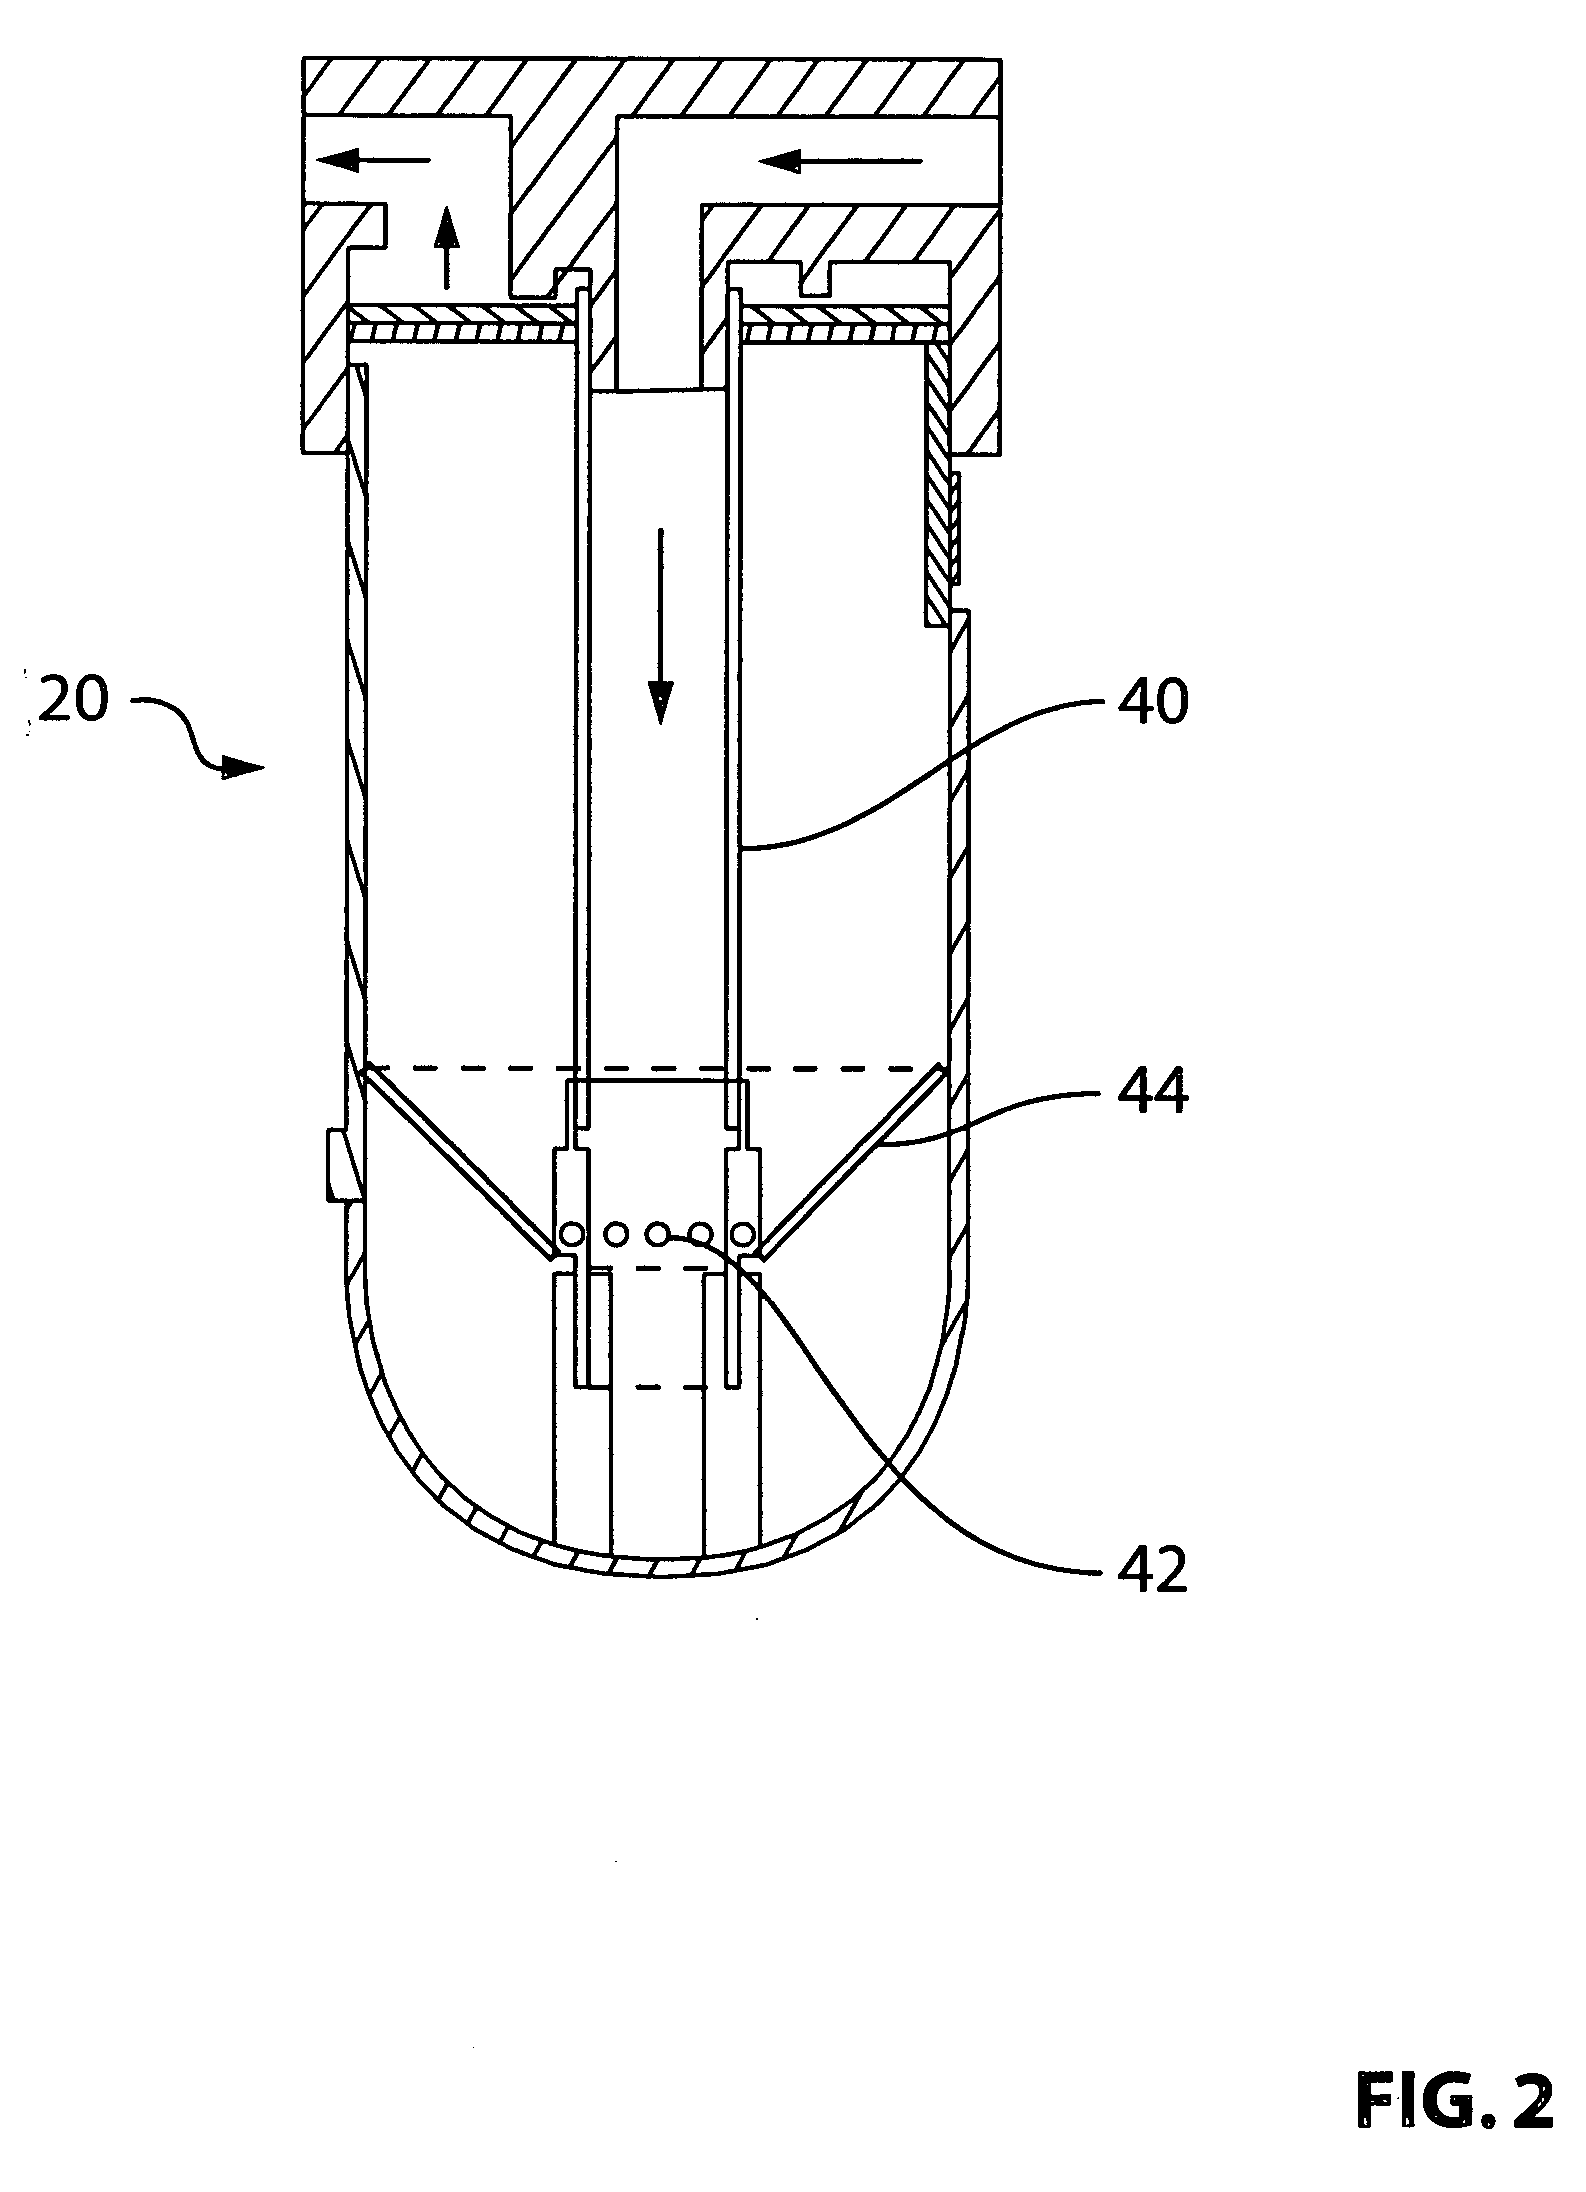 Water treatment apparatus and method